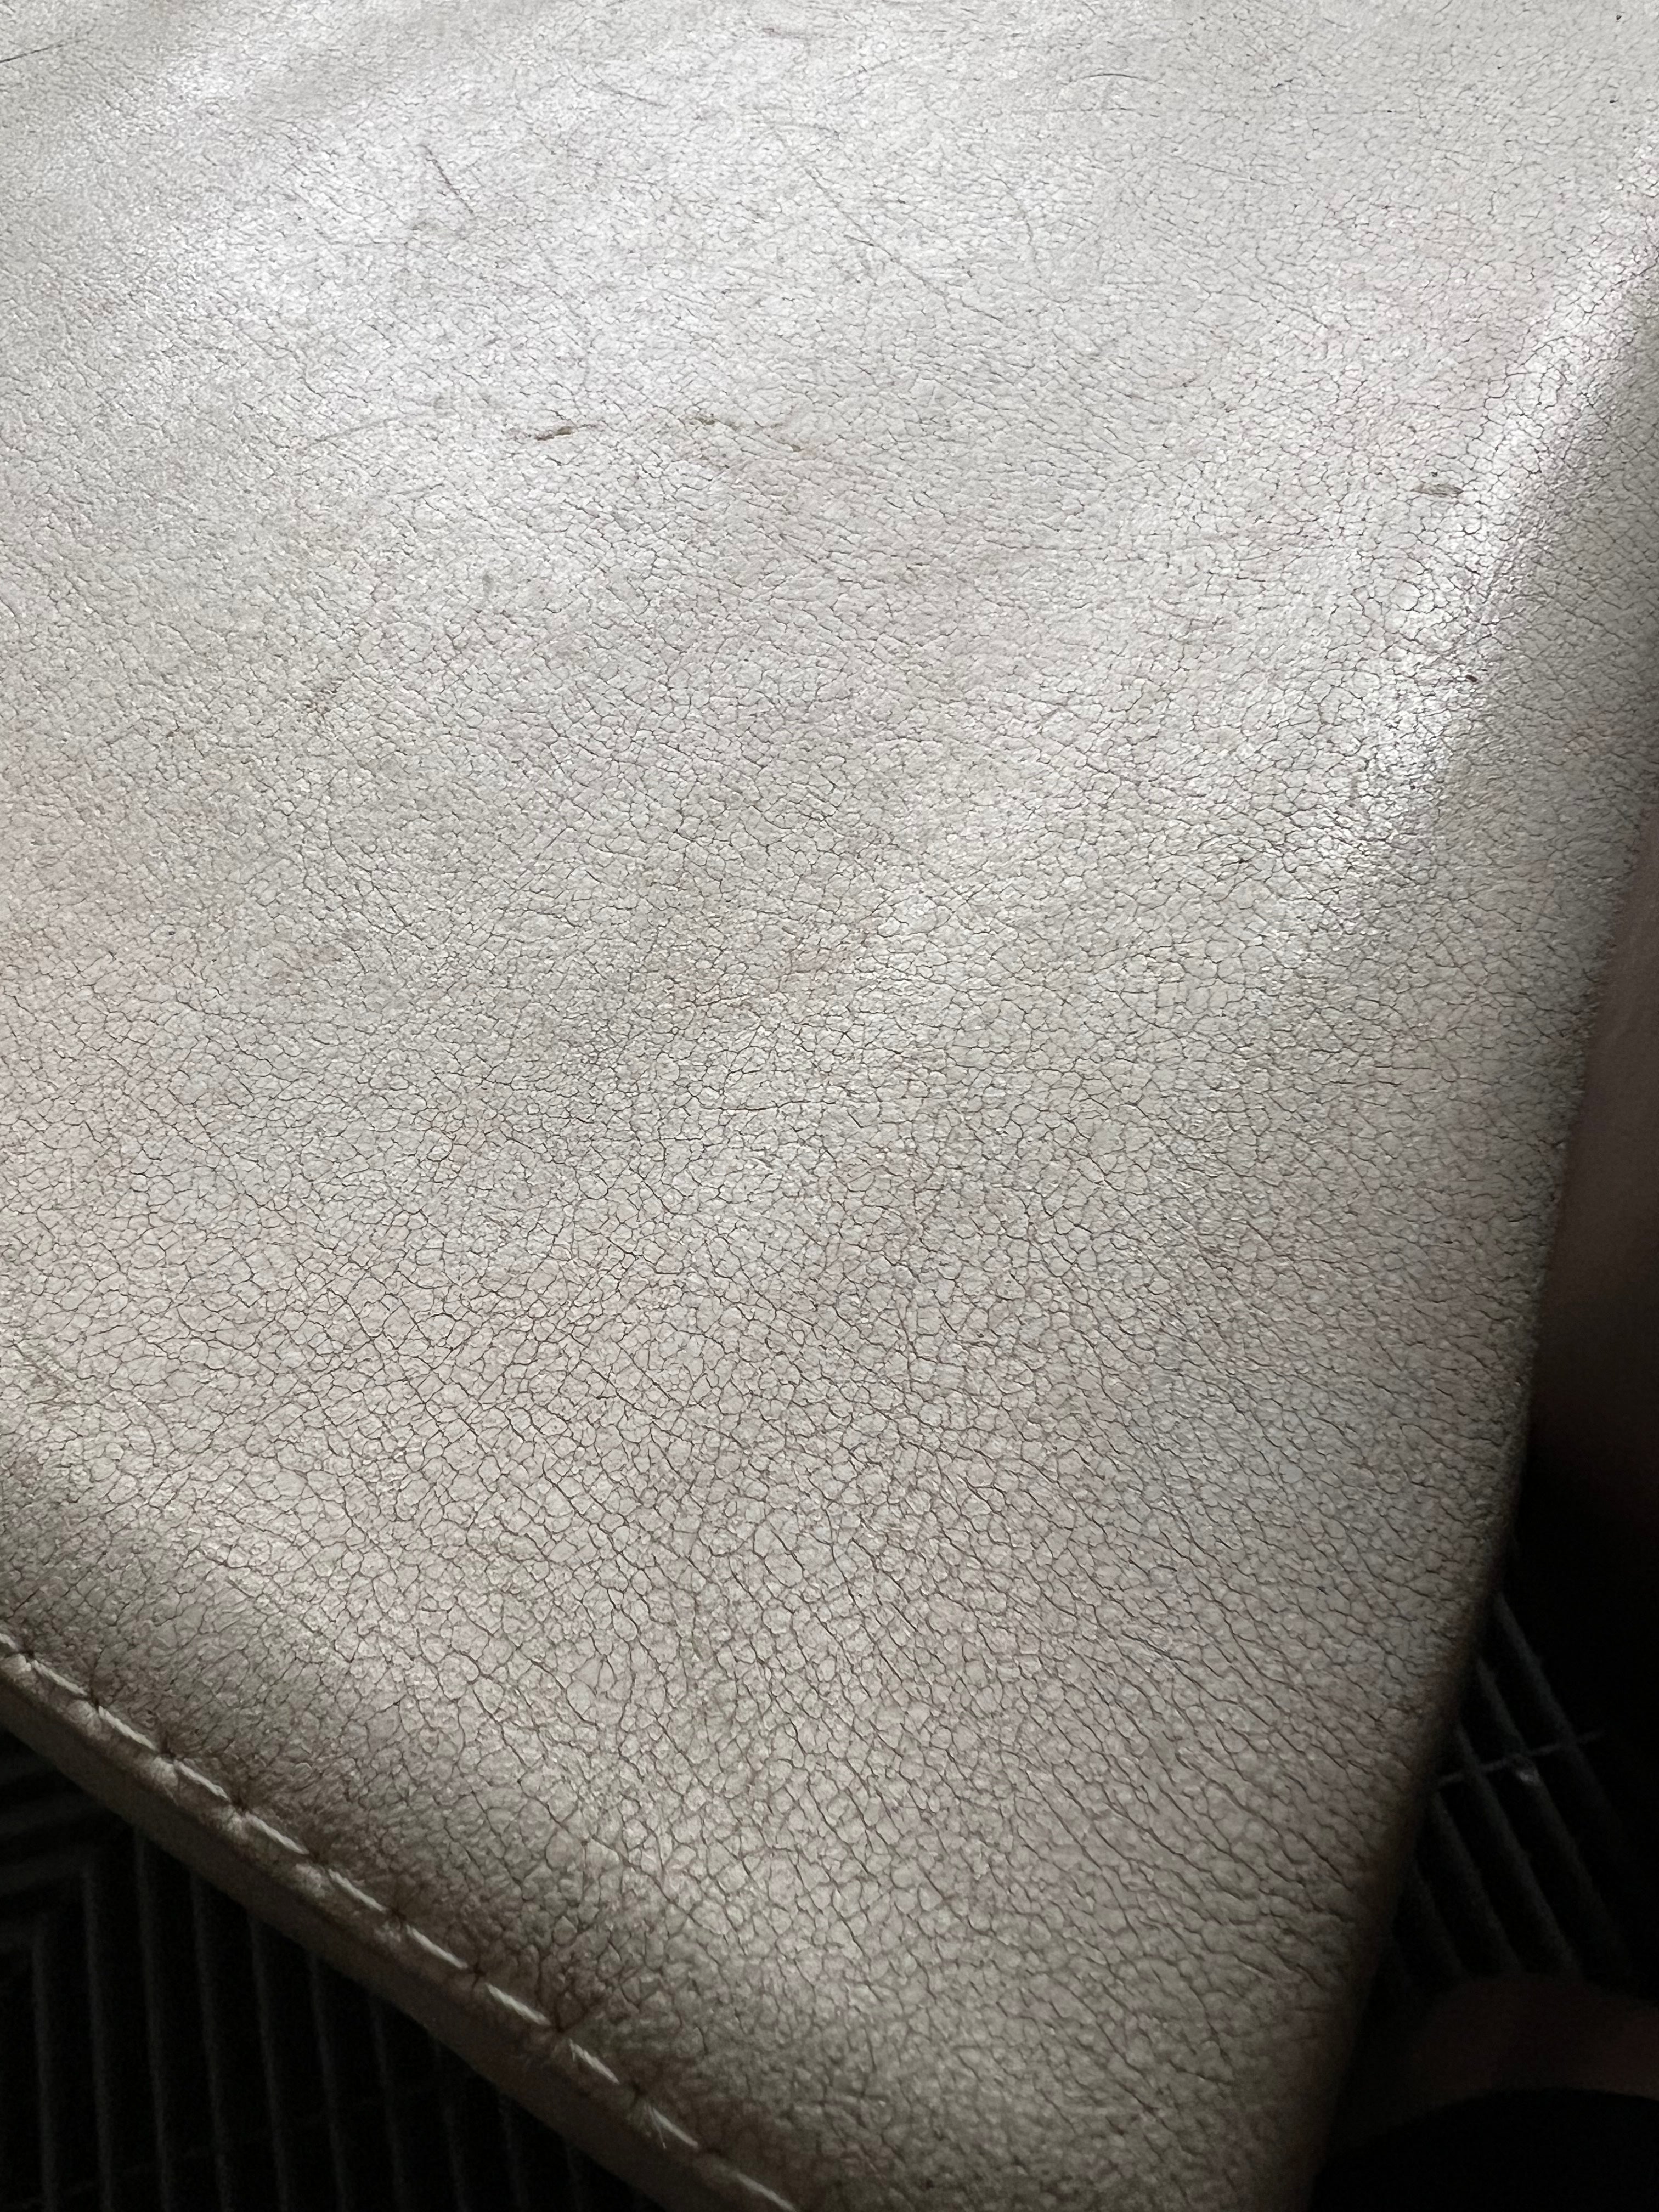 How To Repair Cracked Leather